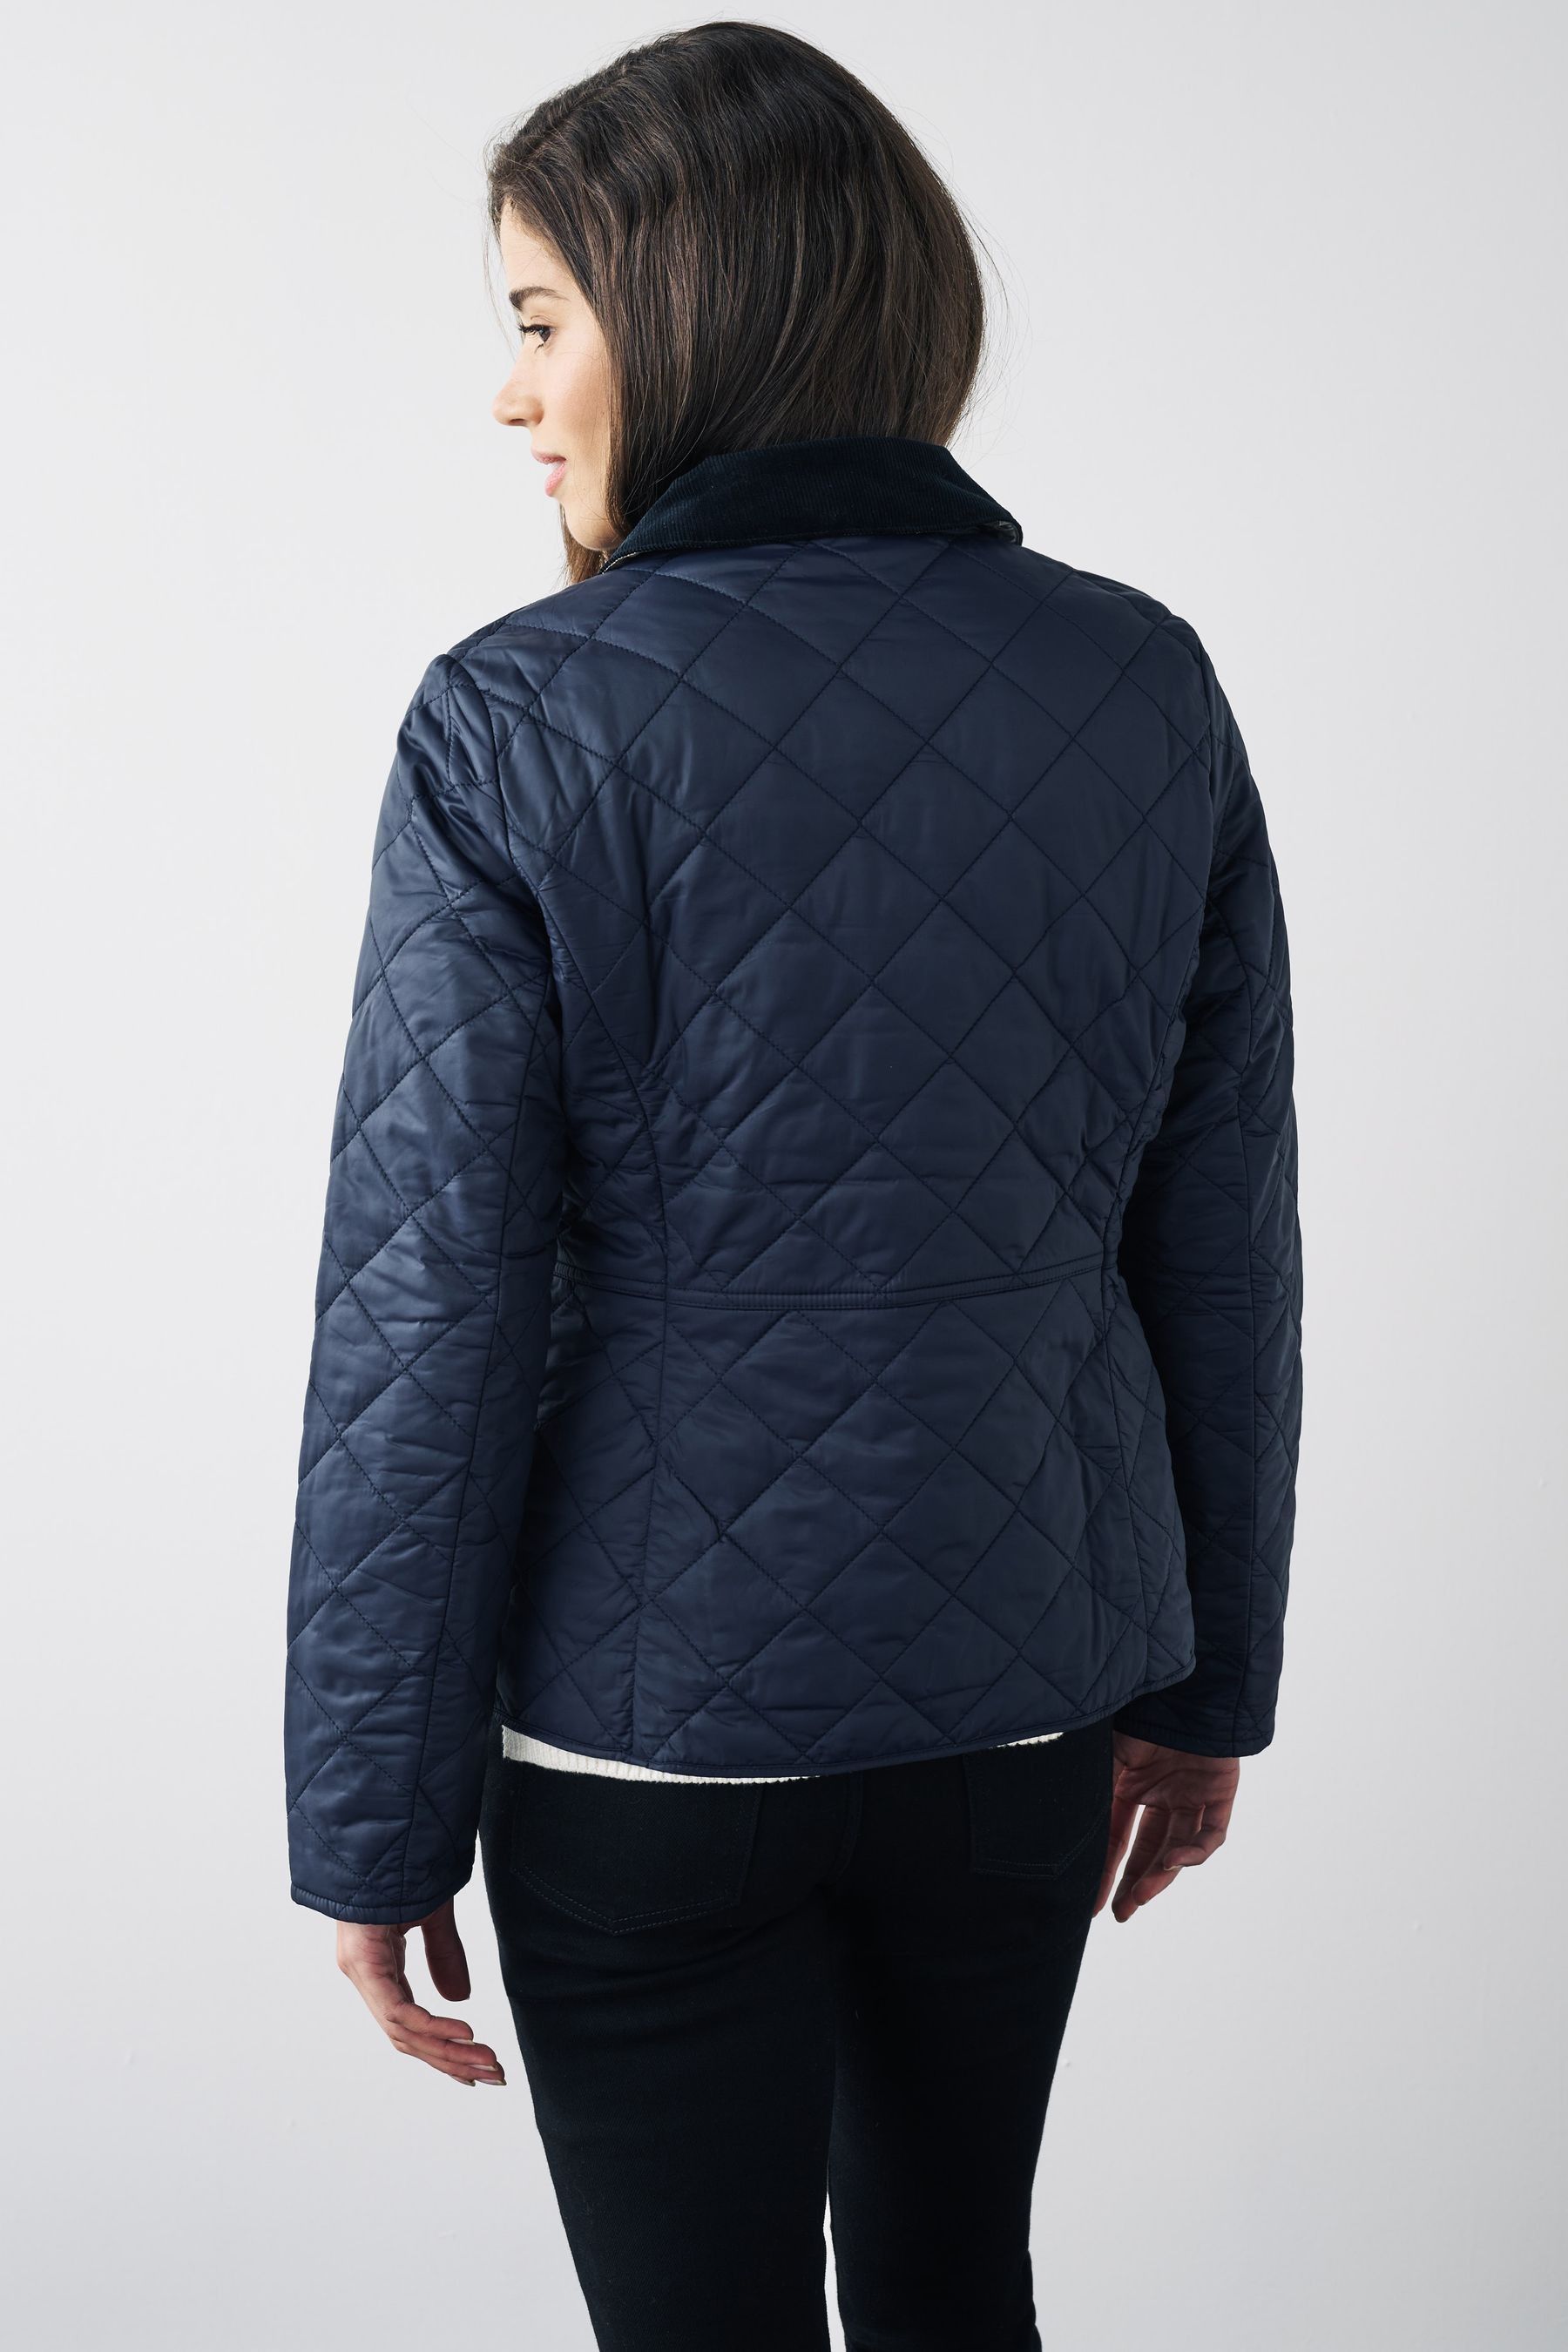 Buy Barbour® Navy Deveron Diamond Quilt Lightweight Jacket from the ...